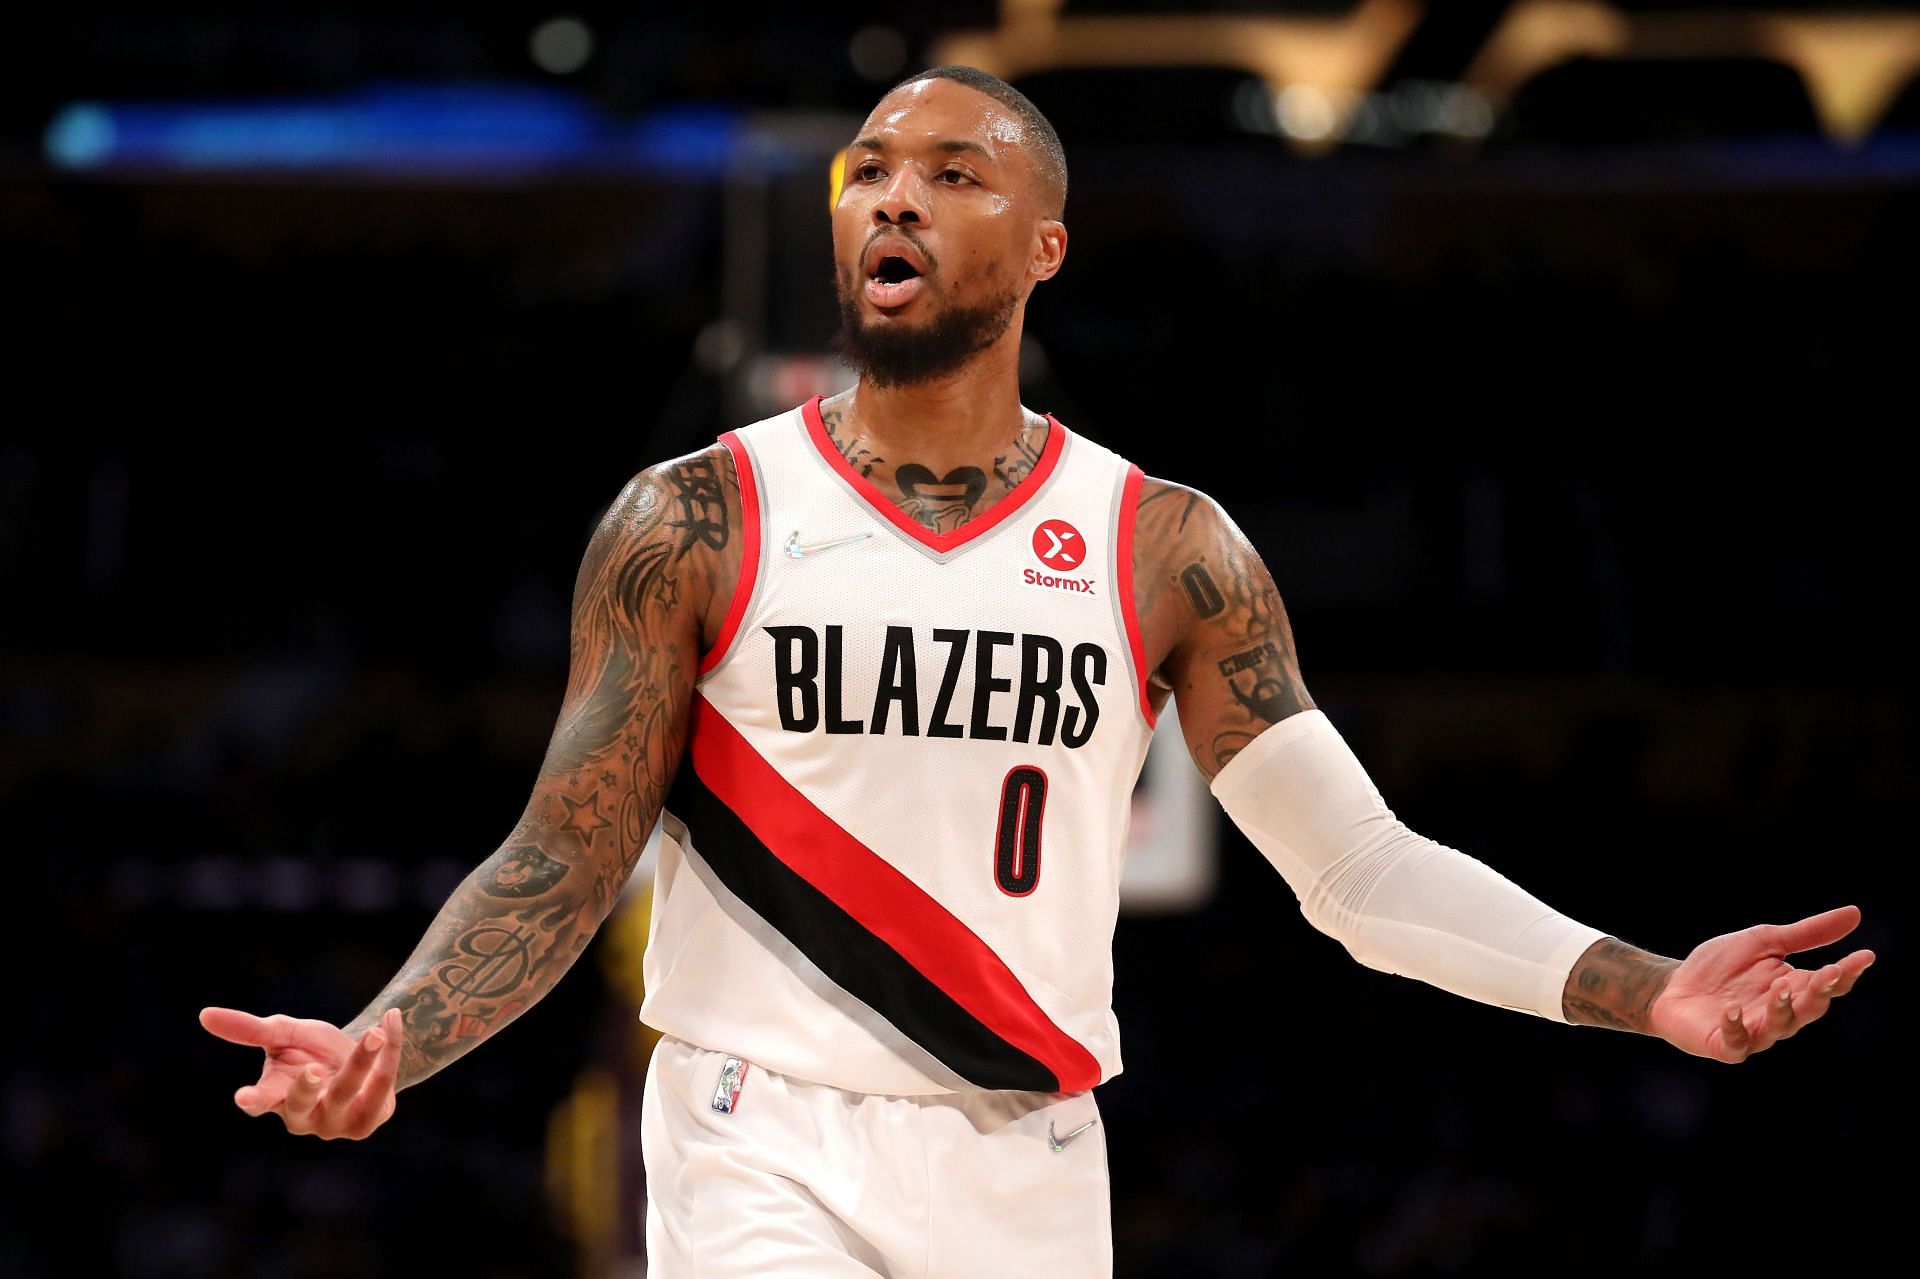 Damian Lillatrd would love to end his career with a championship as part of the Portland Trail Blazers